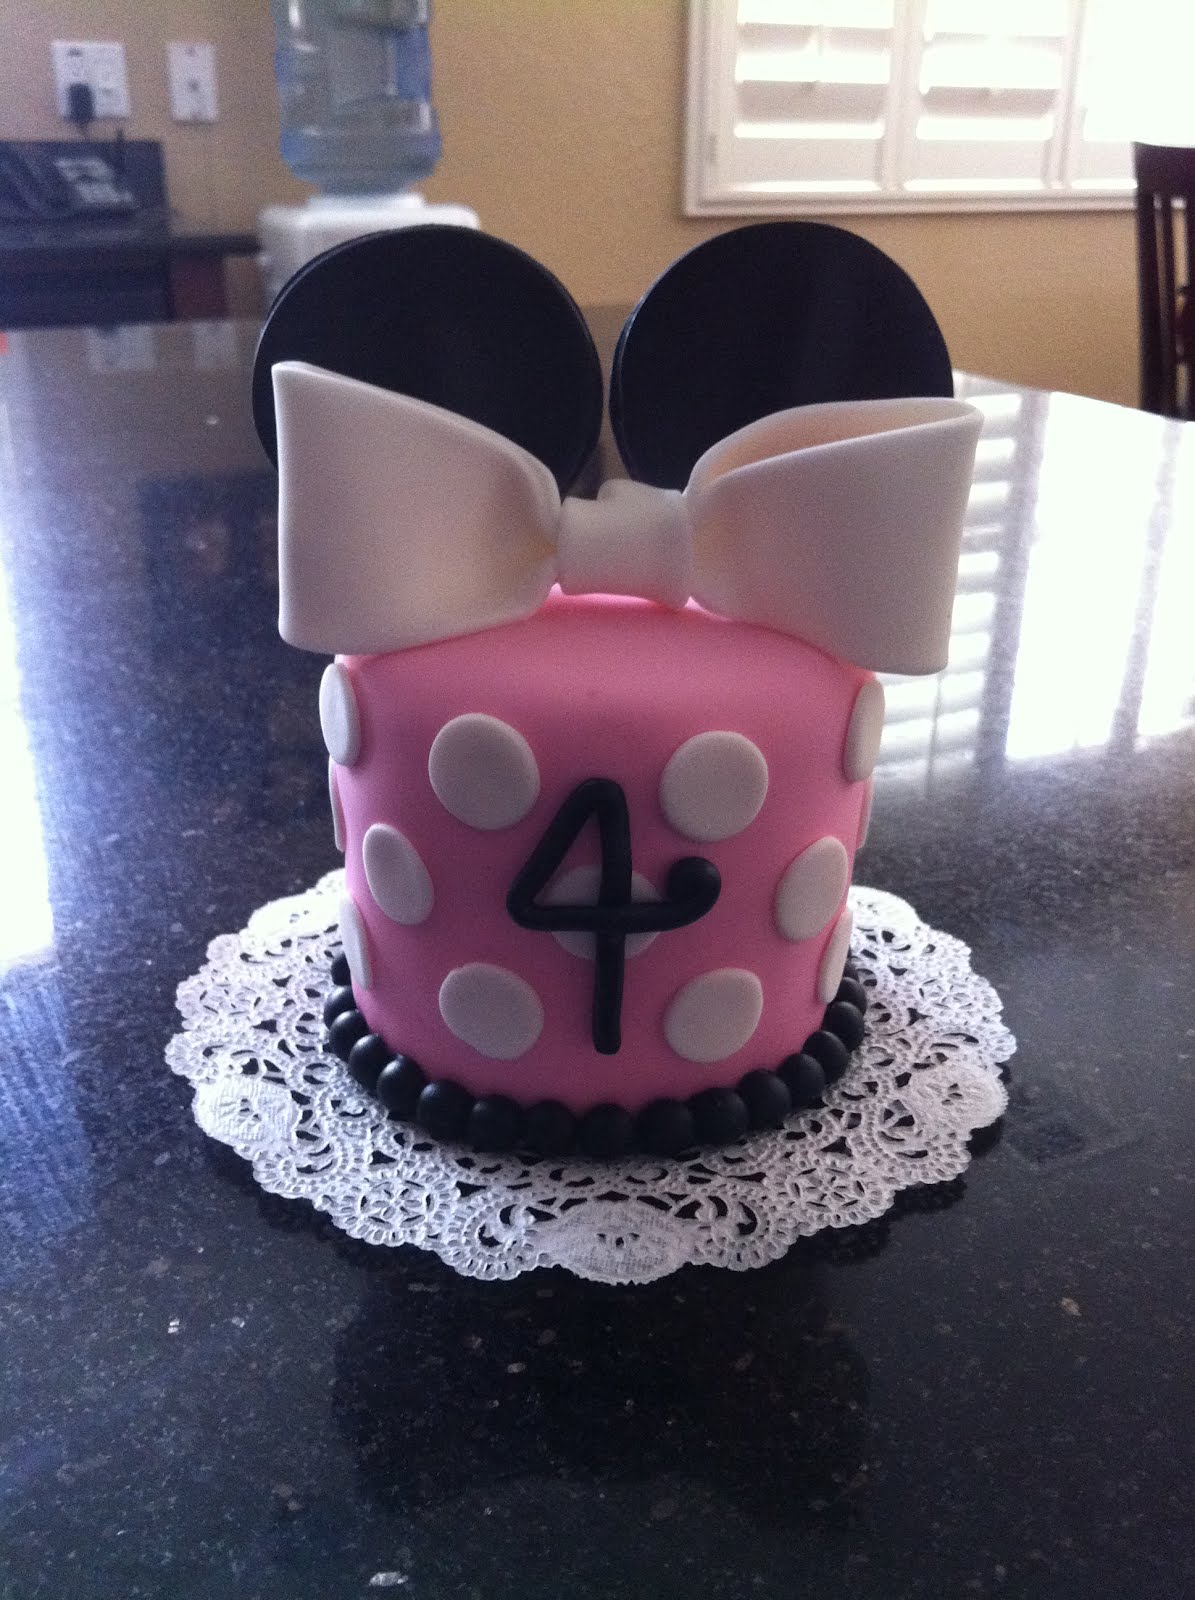 Birthday cake for 4 year old girl | Flickr - Photo Sharing!